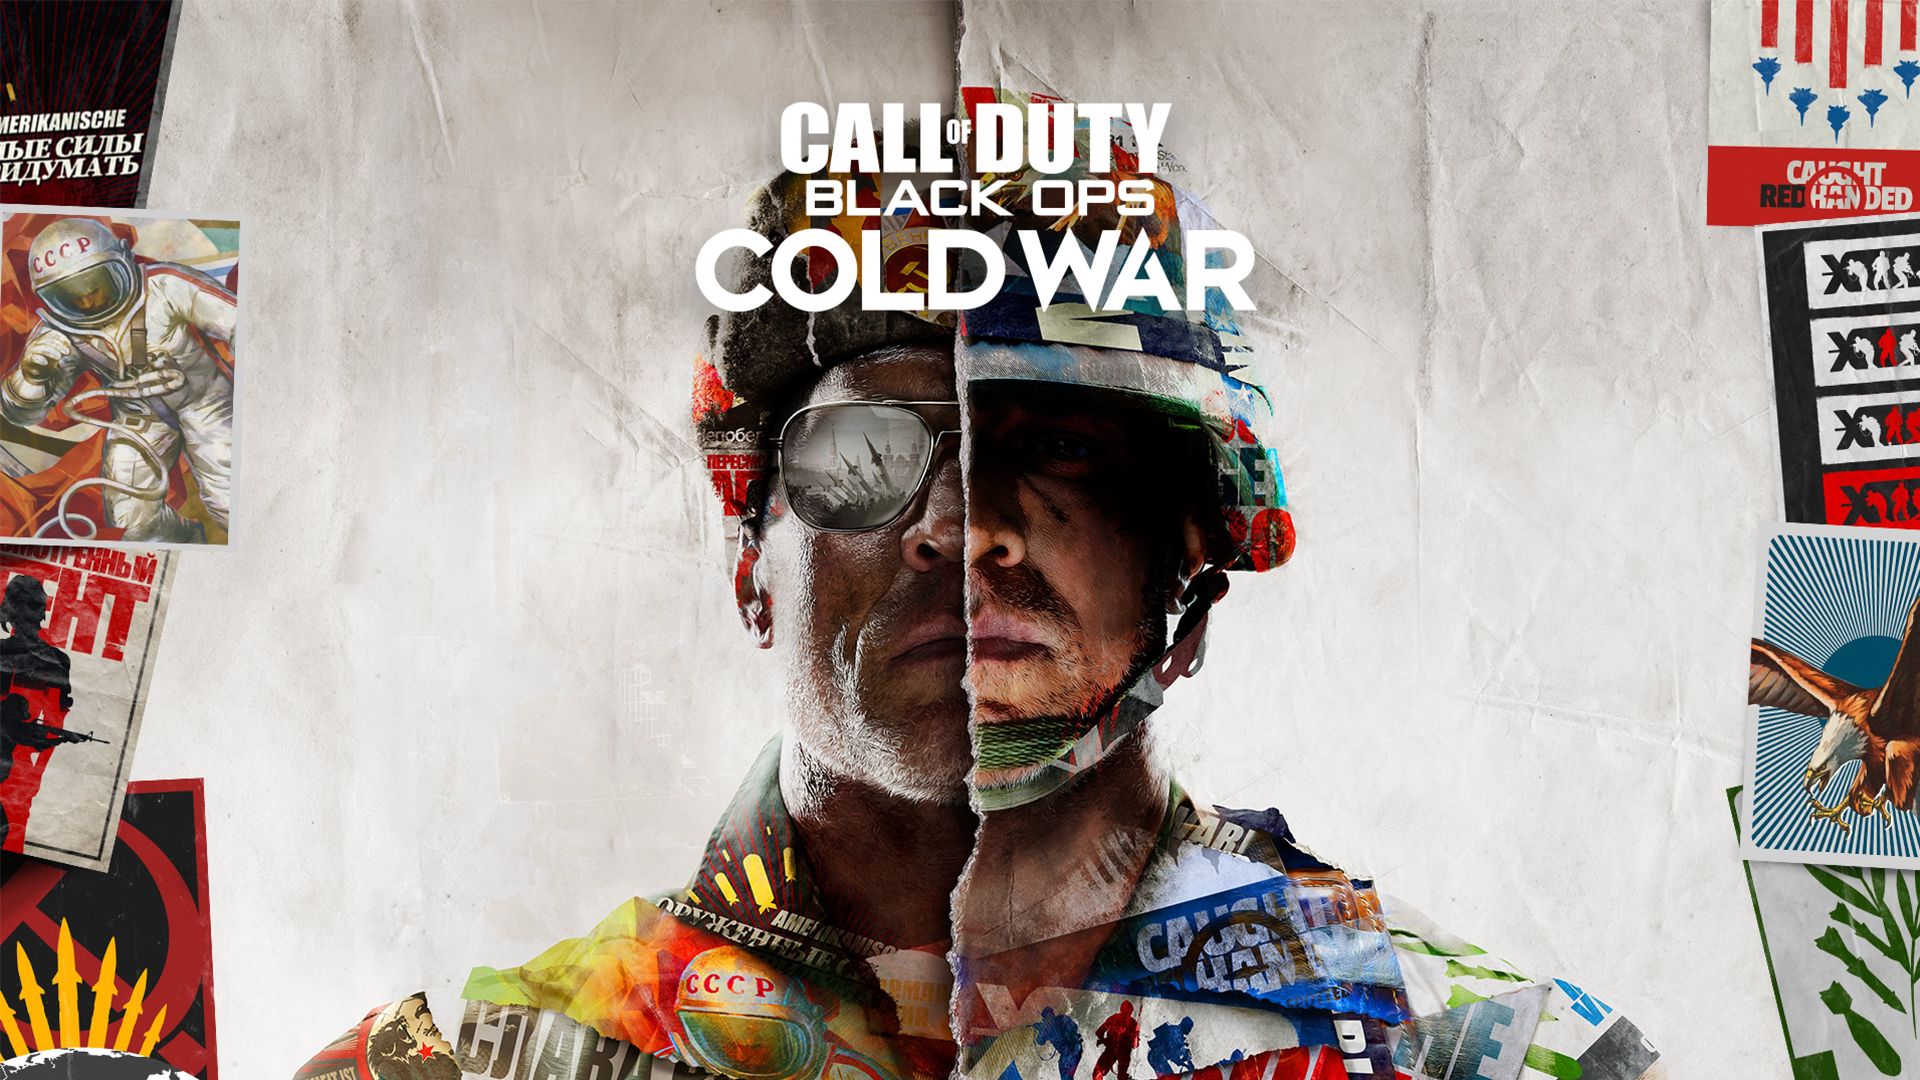 Call of Duty Black Ops Cold War Wallpaper, HD Games 4K Wallpapers, Image, Photos and Backgrounds